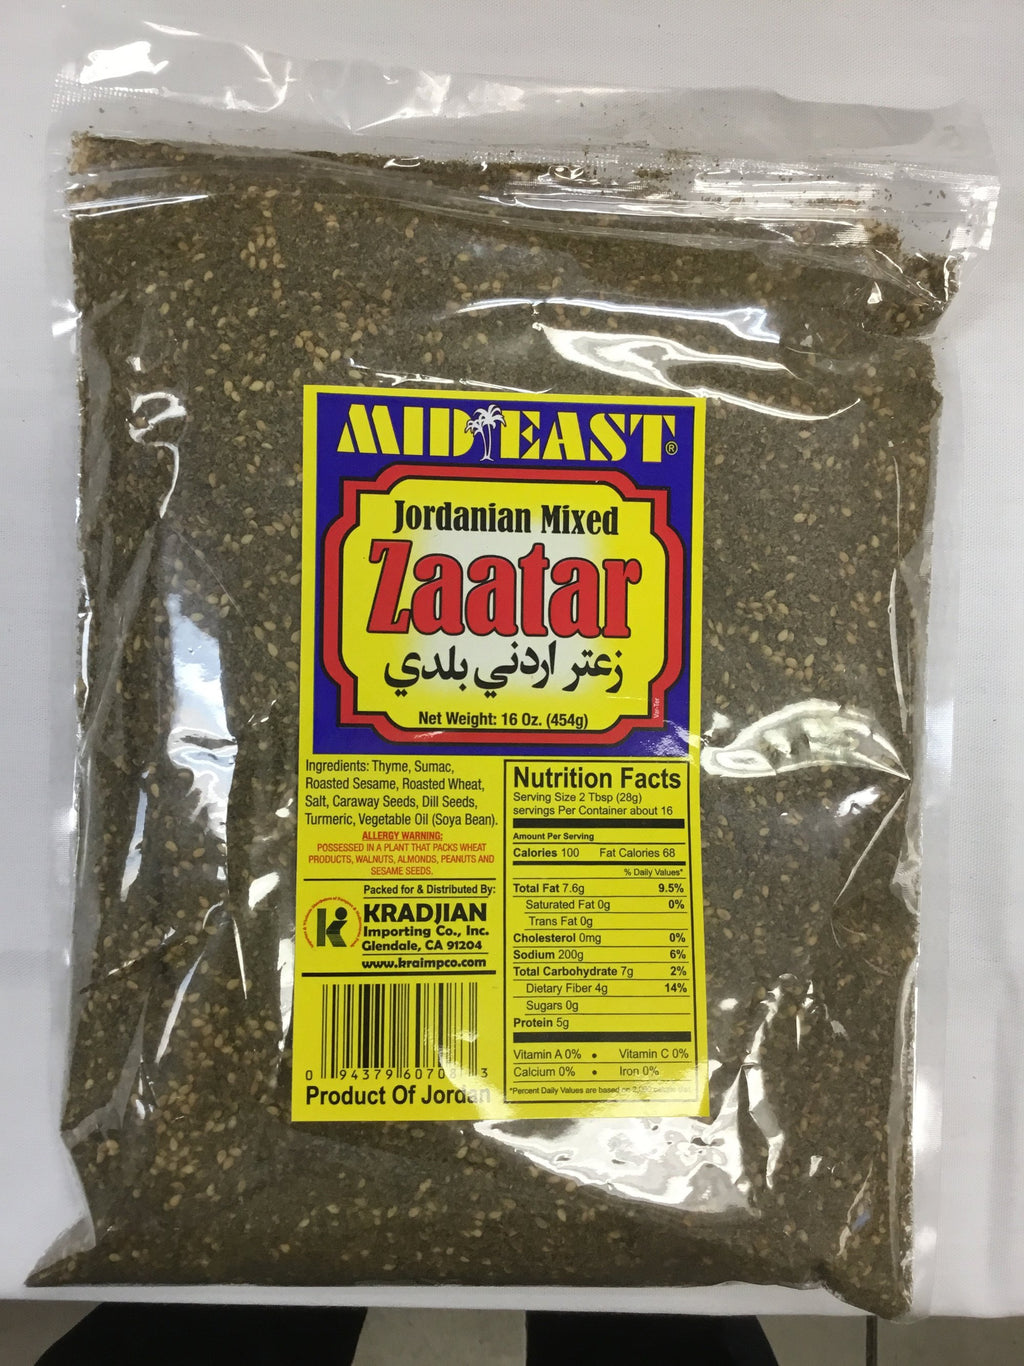 Zaatar (Middle East Spice Blend): 1lb